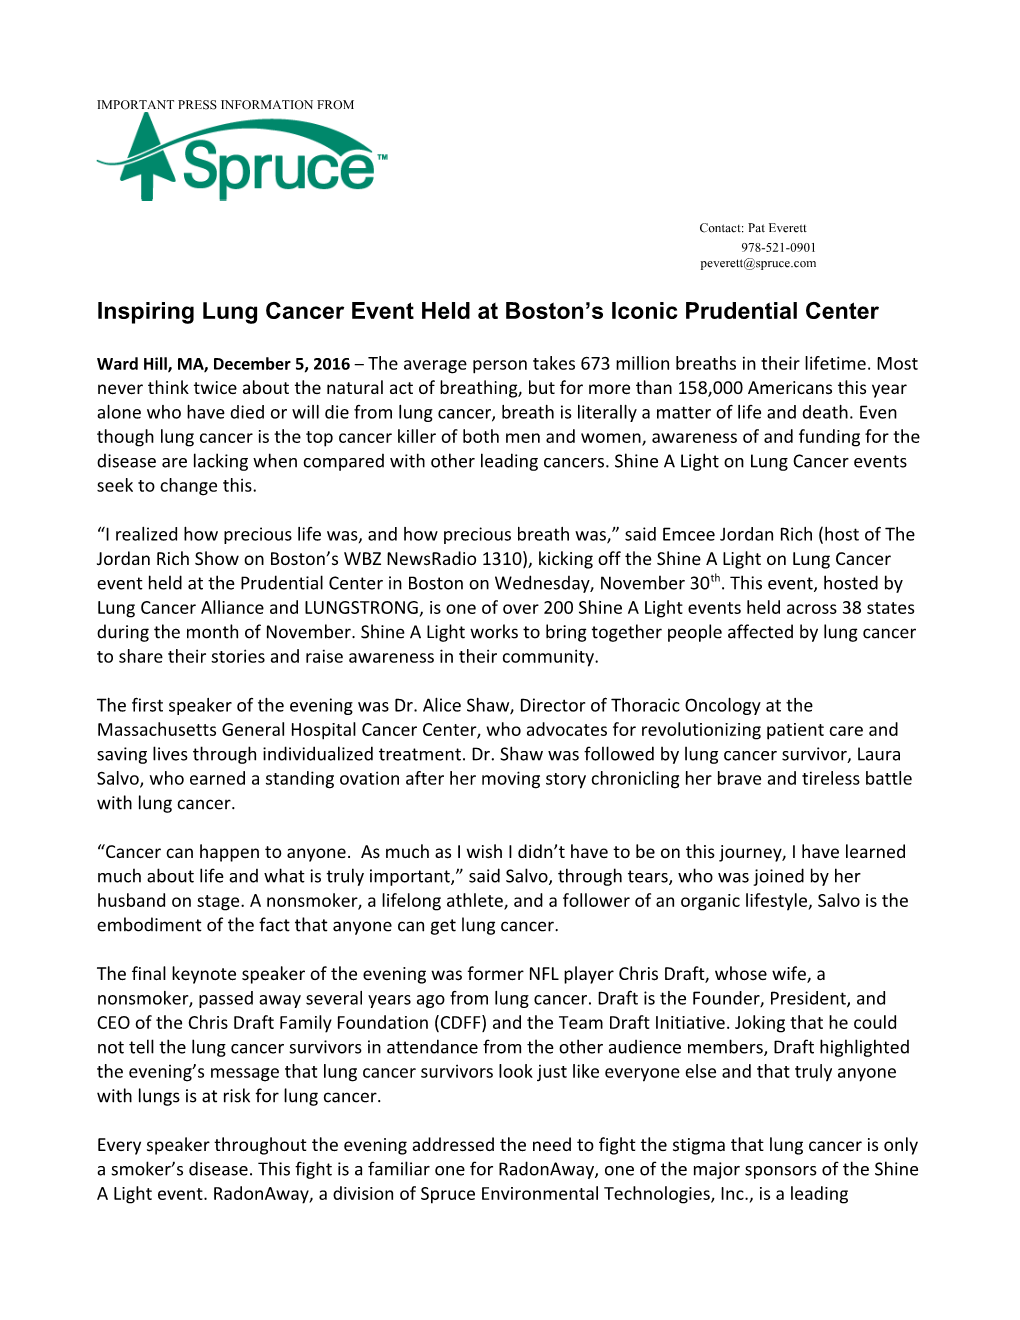 Inspiring Lung Cancer Event Held at Boston S Iconic Prudential Center